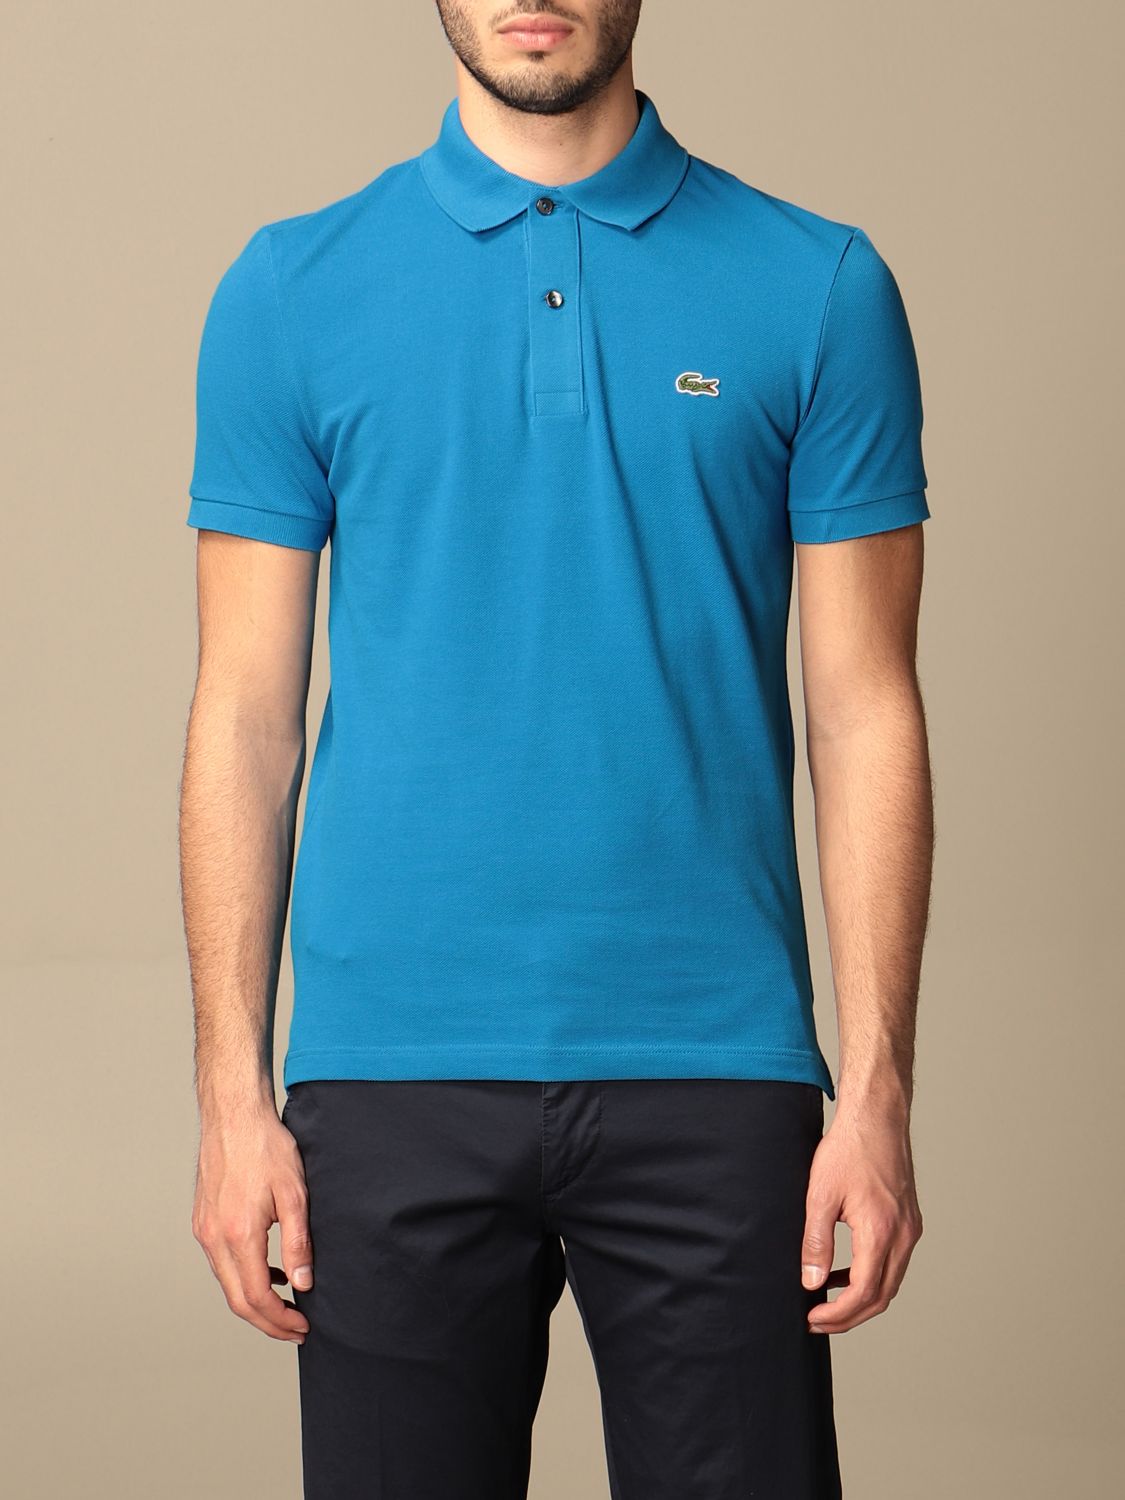 Meget sur Sindssyge Telegraf LACOSTE: basic cotton polo shirt with logo - Royal Blue | Lacoste polo shirt  PH4012 online on GIGLIO.COM